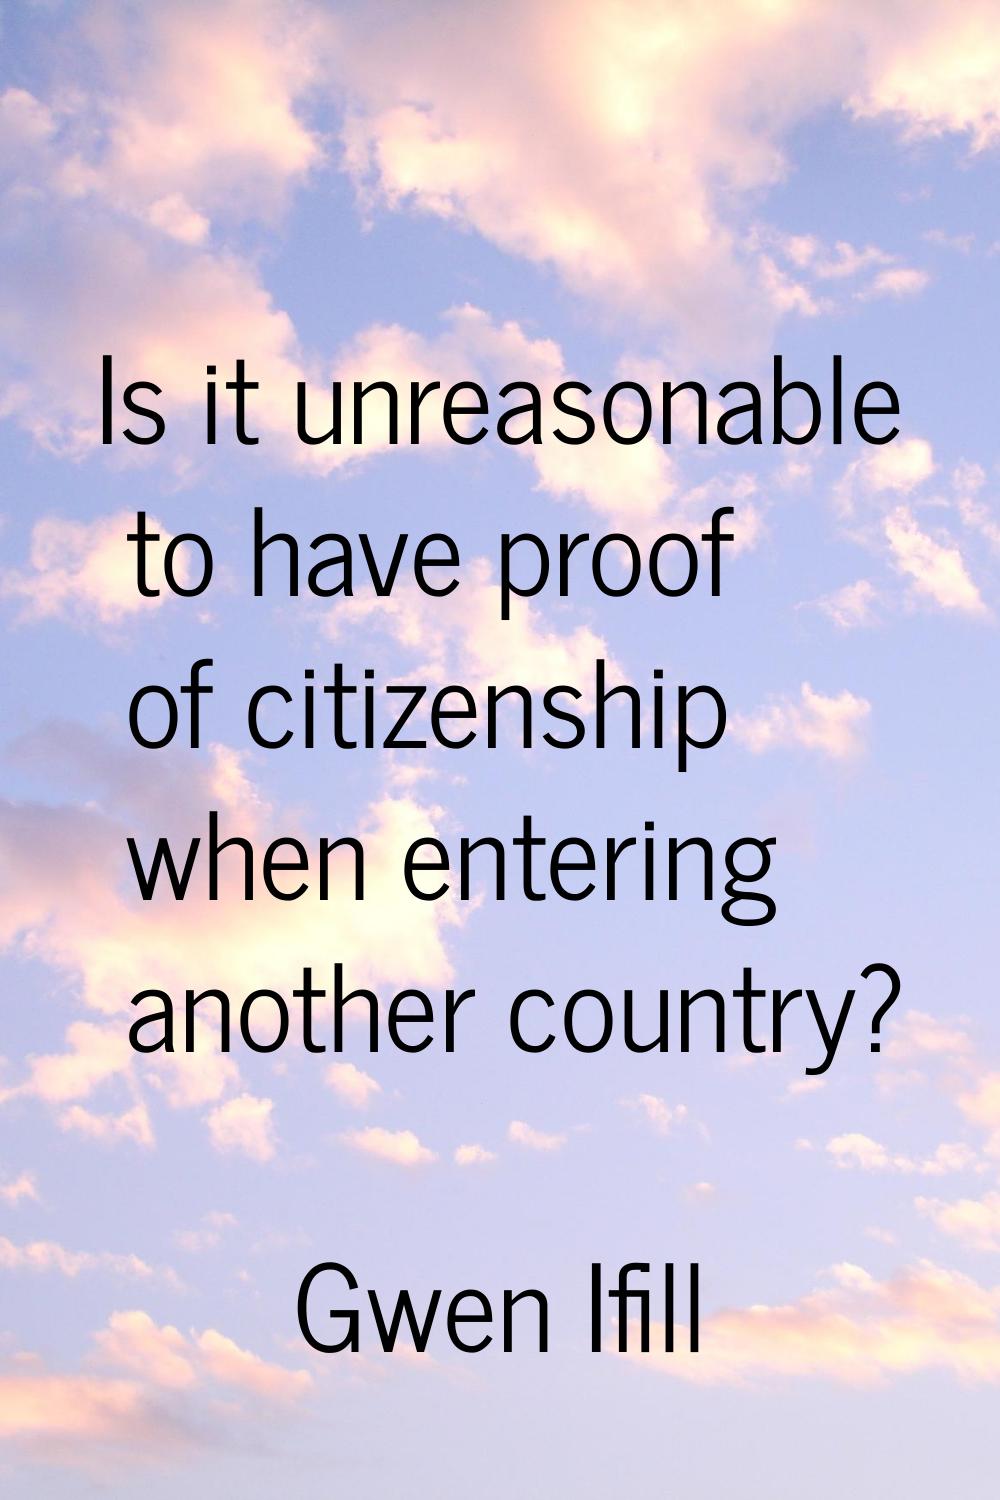 Is it unreasonable to have proof of citizenship when entering another country?